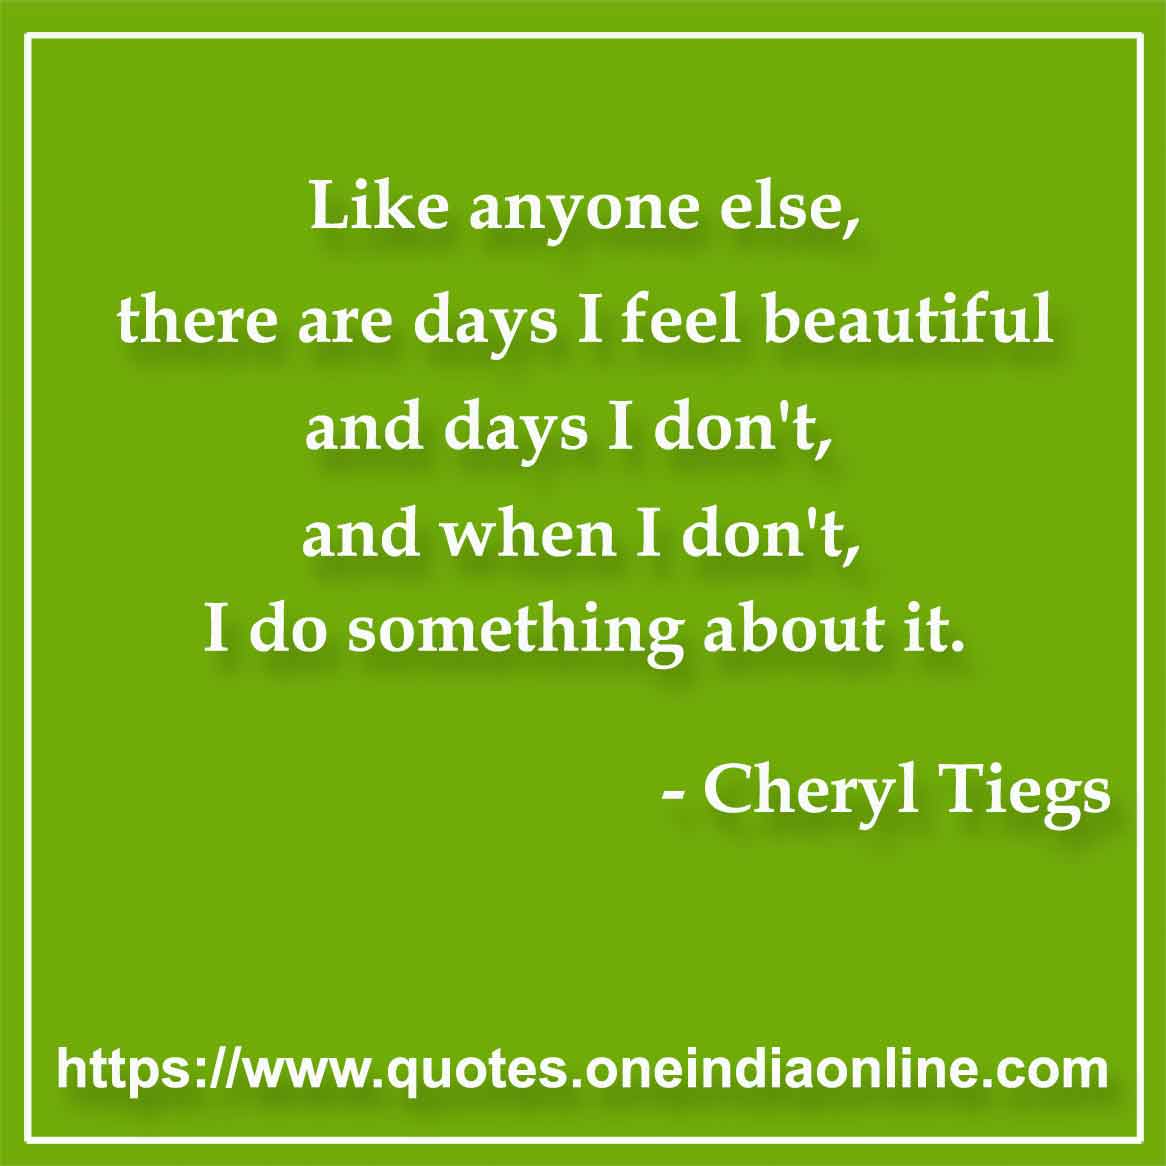 Like anyone else, there are days I feel beautiful and days I don't, and when I don't, I do something about it.

- Beauty Quote by Cheryl Tiegs